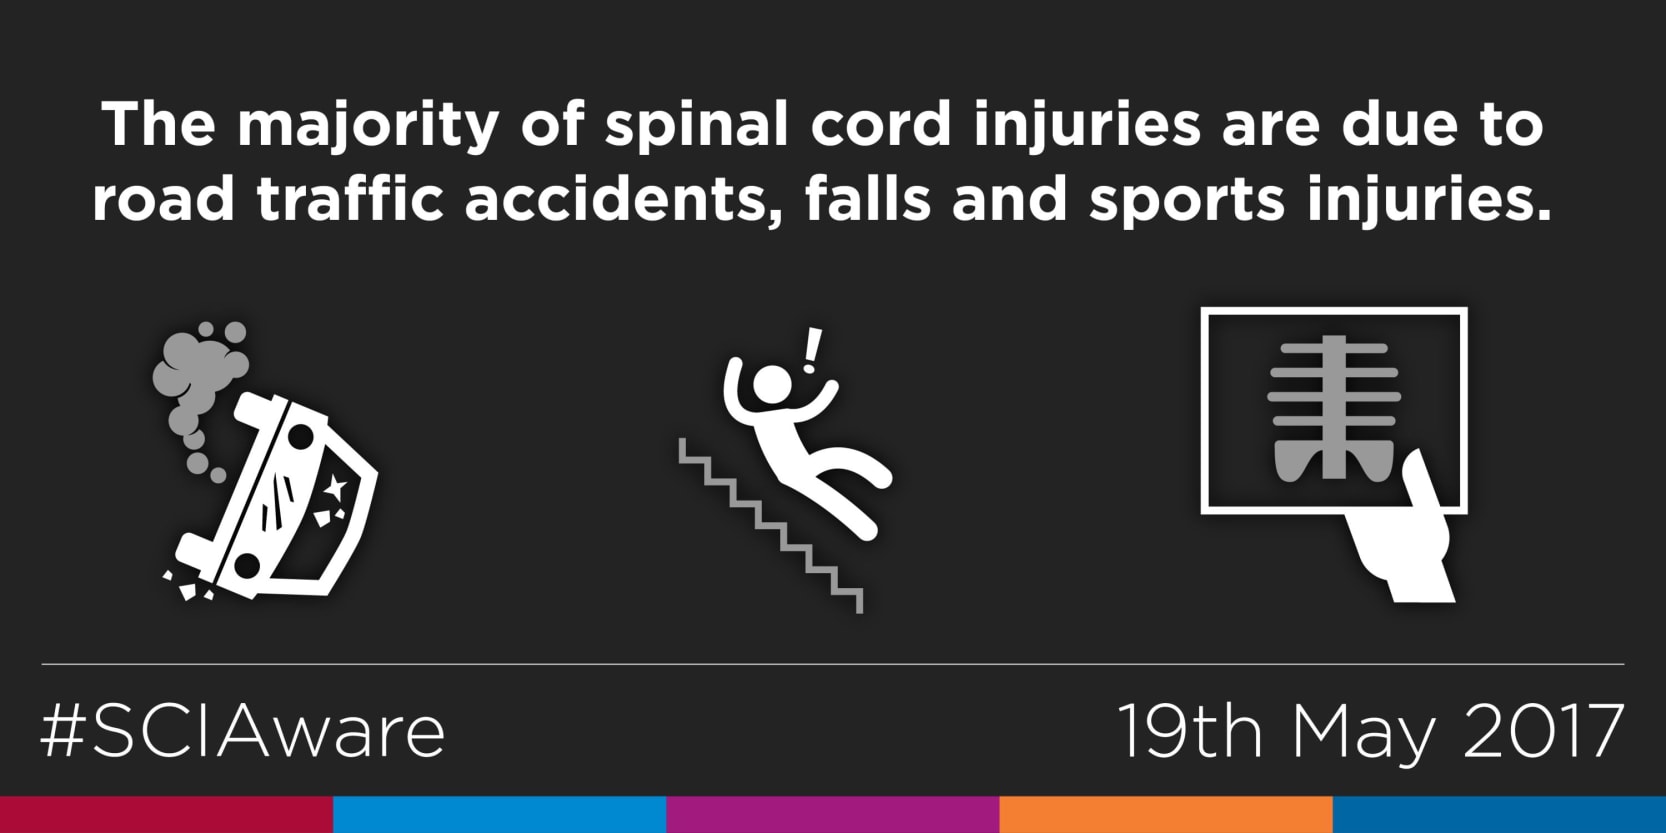 Causes of spinal cord injury